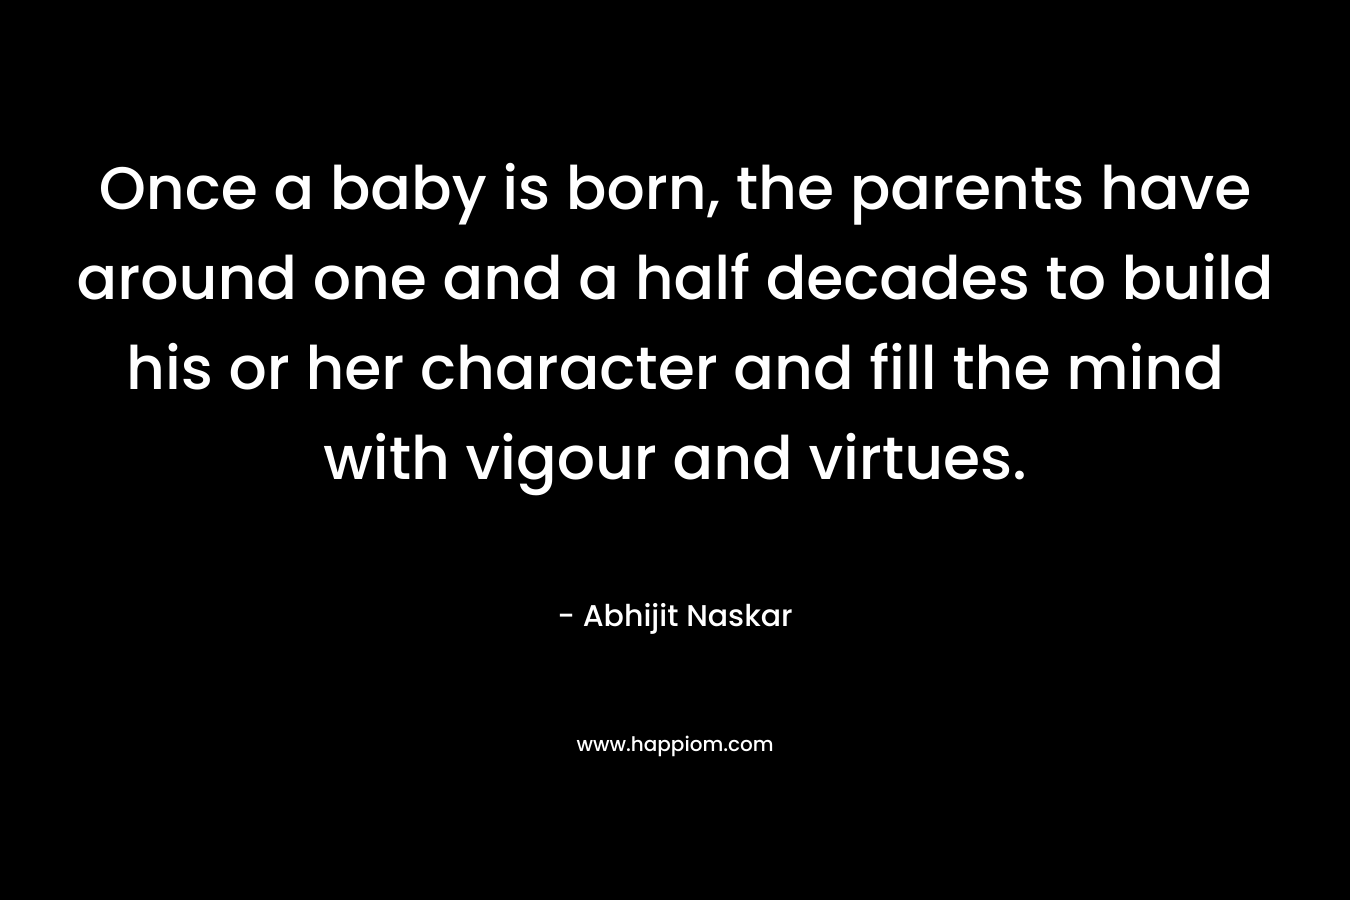 Once a baby is born, the parents have around one and a half decades to build his or her character and fill the mind with vigour and virtues.